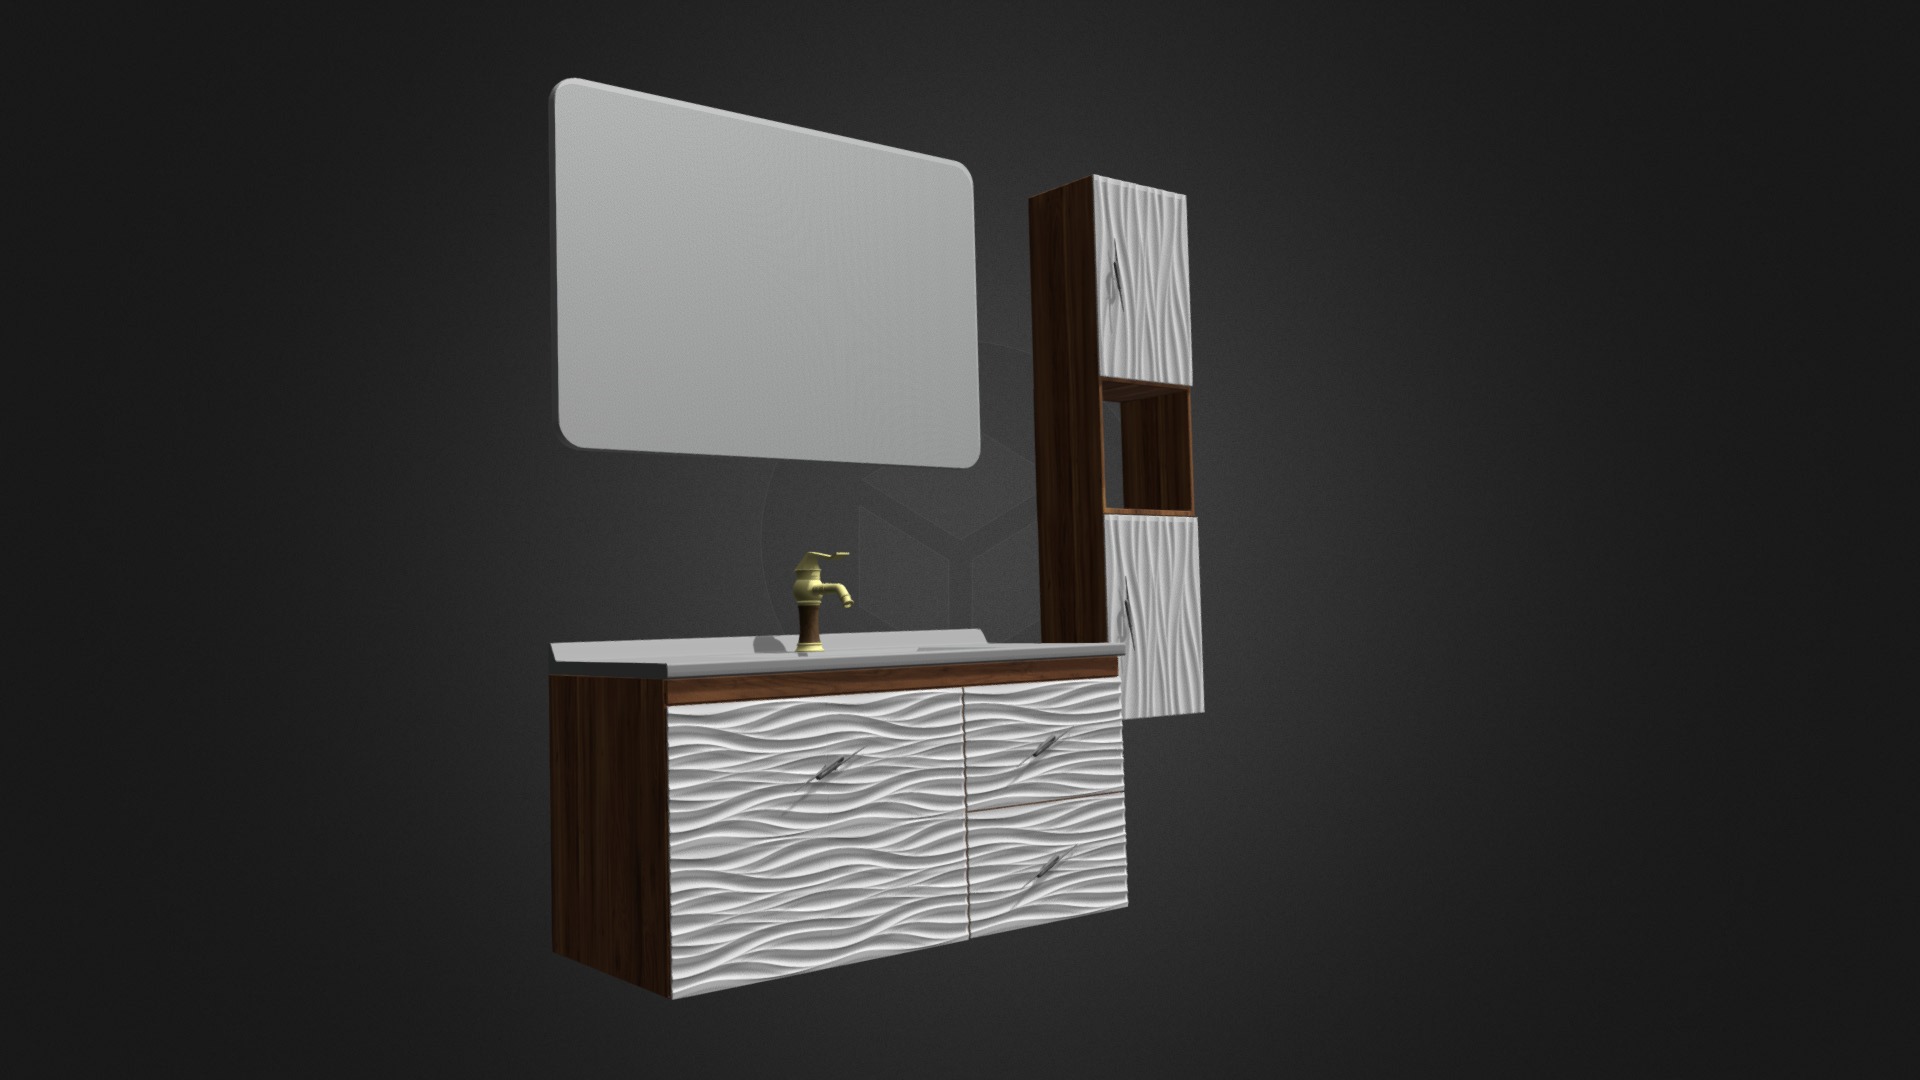 3D model Bathroom Set - This is a 3D model of the Bathroom Set. The 3D model is about a wooden cabinet with a lamp on top.